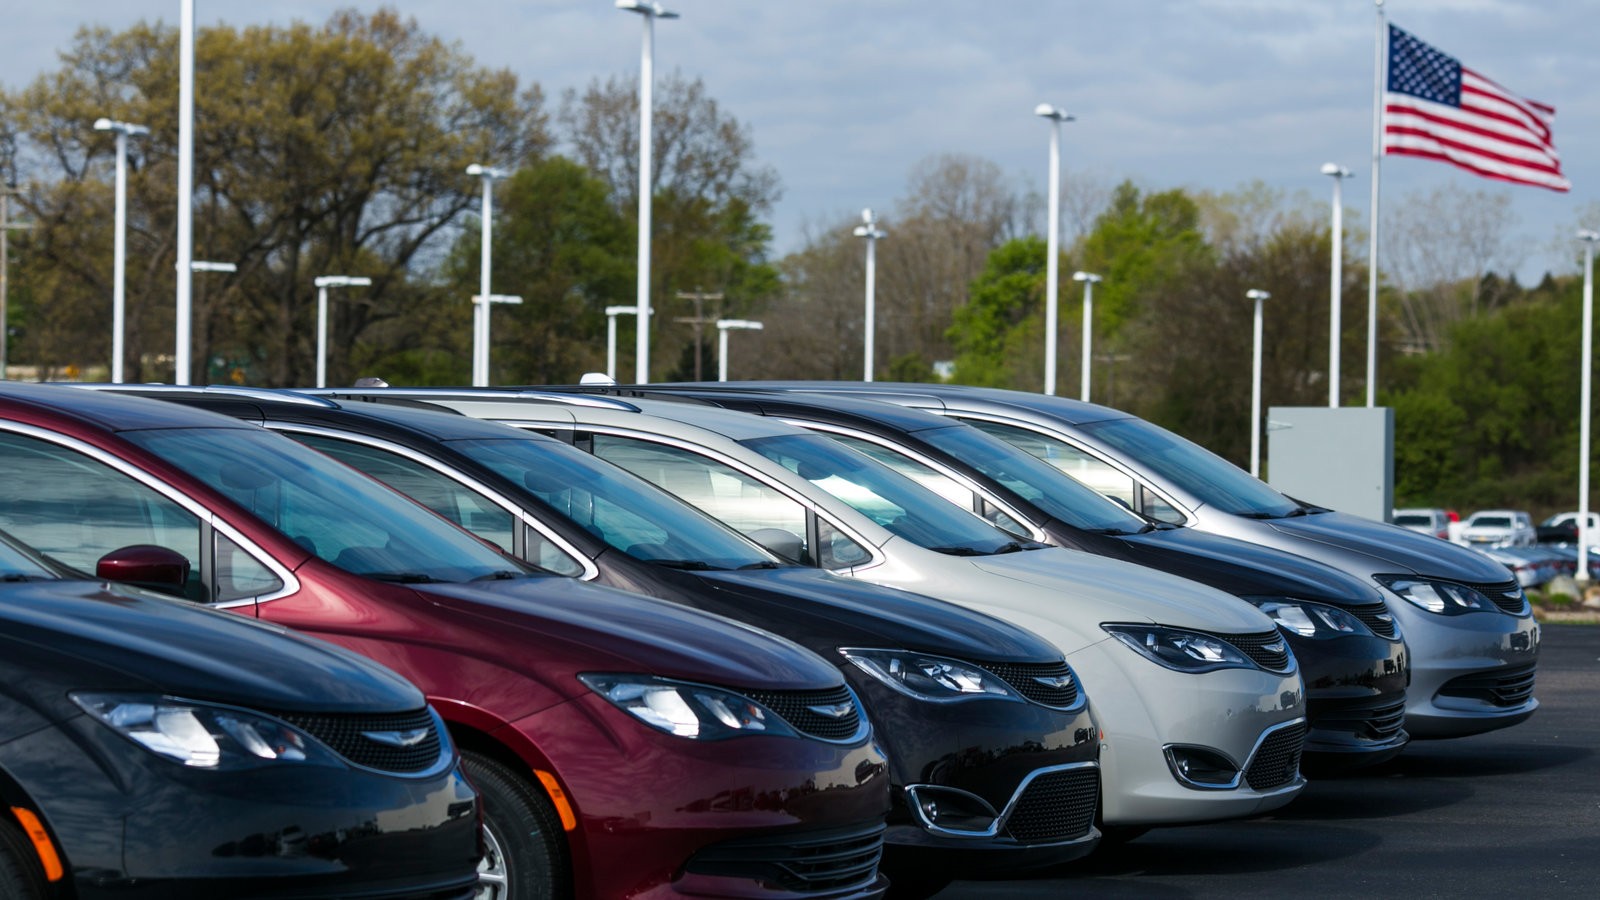 USAuto-Sales-Fall-Sharply-in-the-First-Quarter